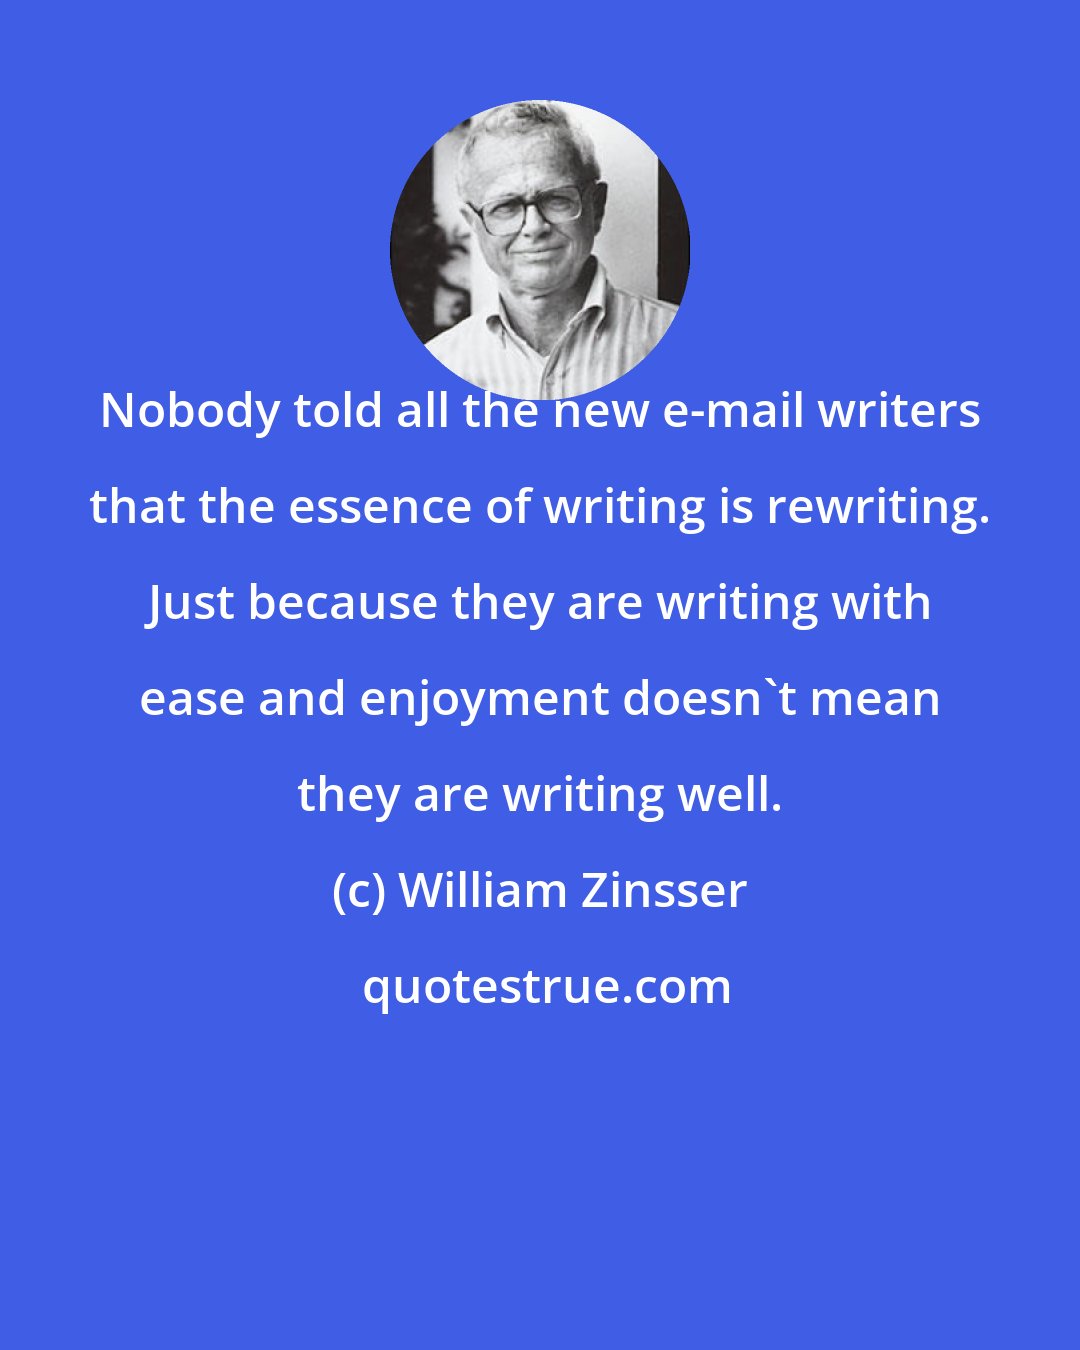 William Zinsser: Nobody told all the new e-mail writers that the essence of writing is rewriting. Just because they are writing with ease and enjoyment doesn't mean they are writing well.